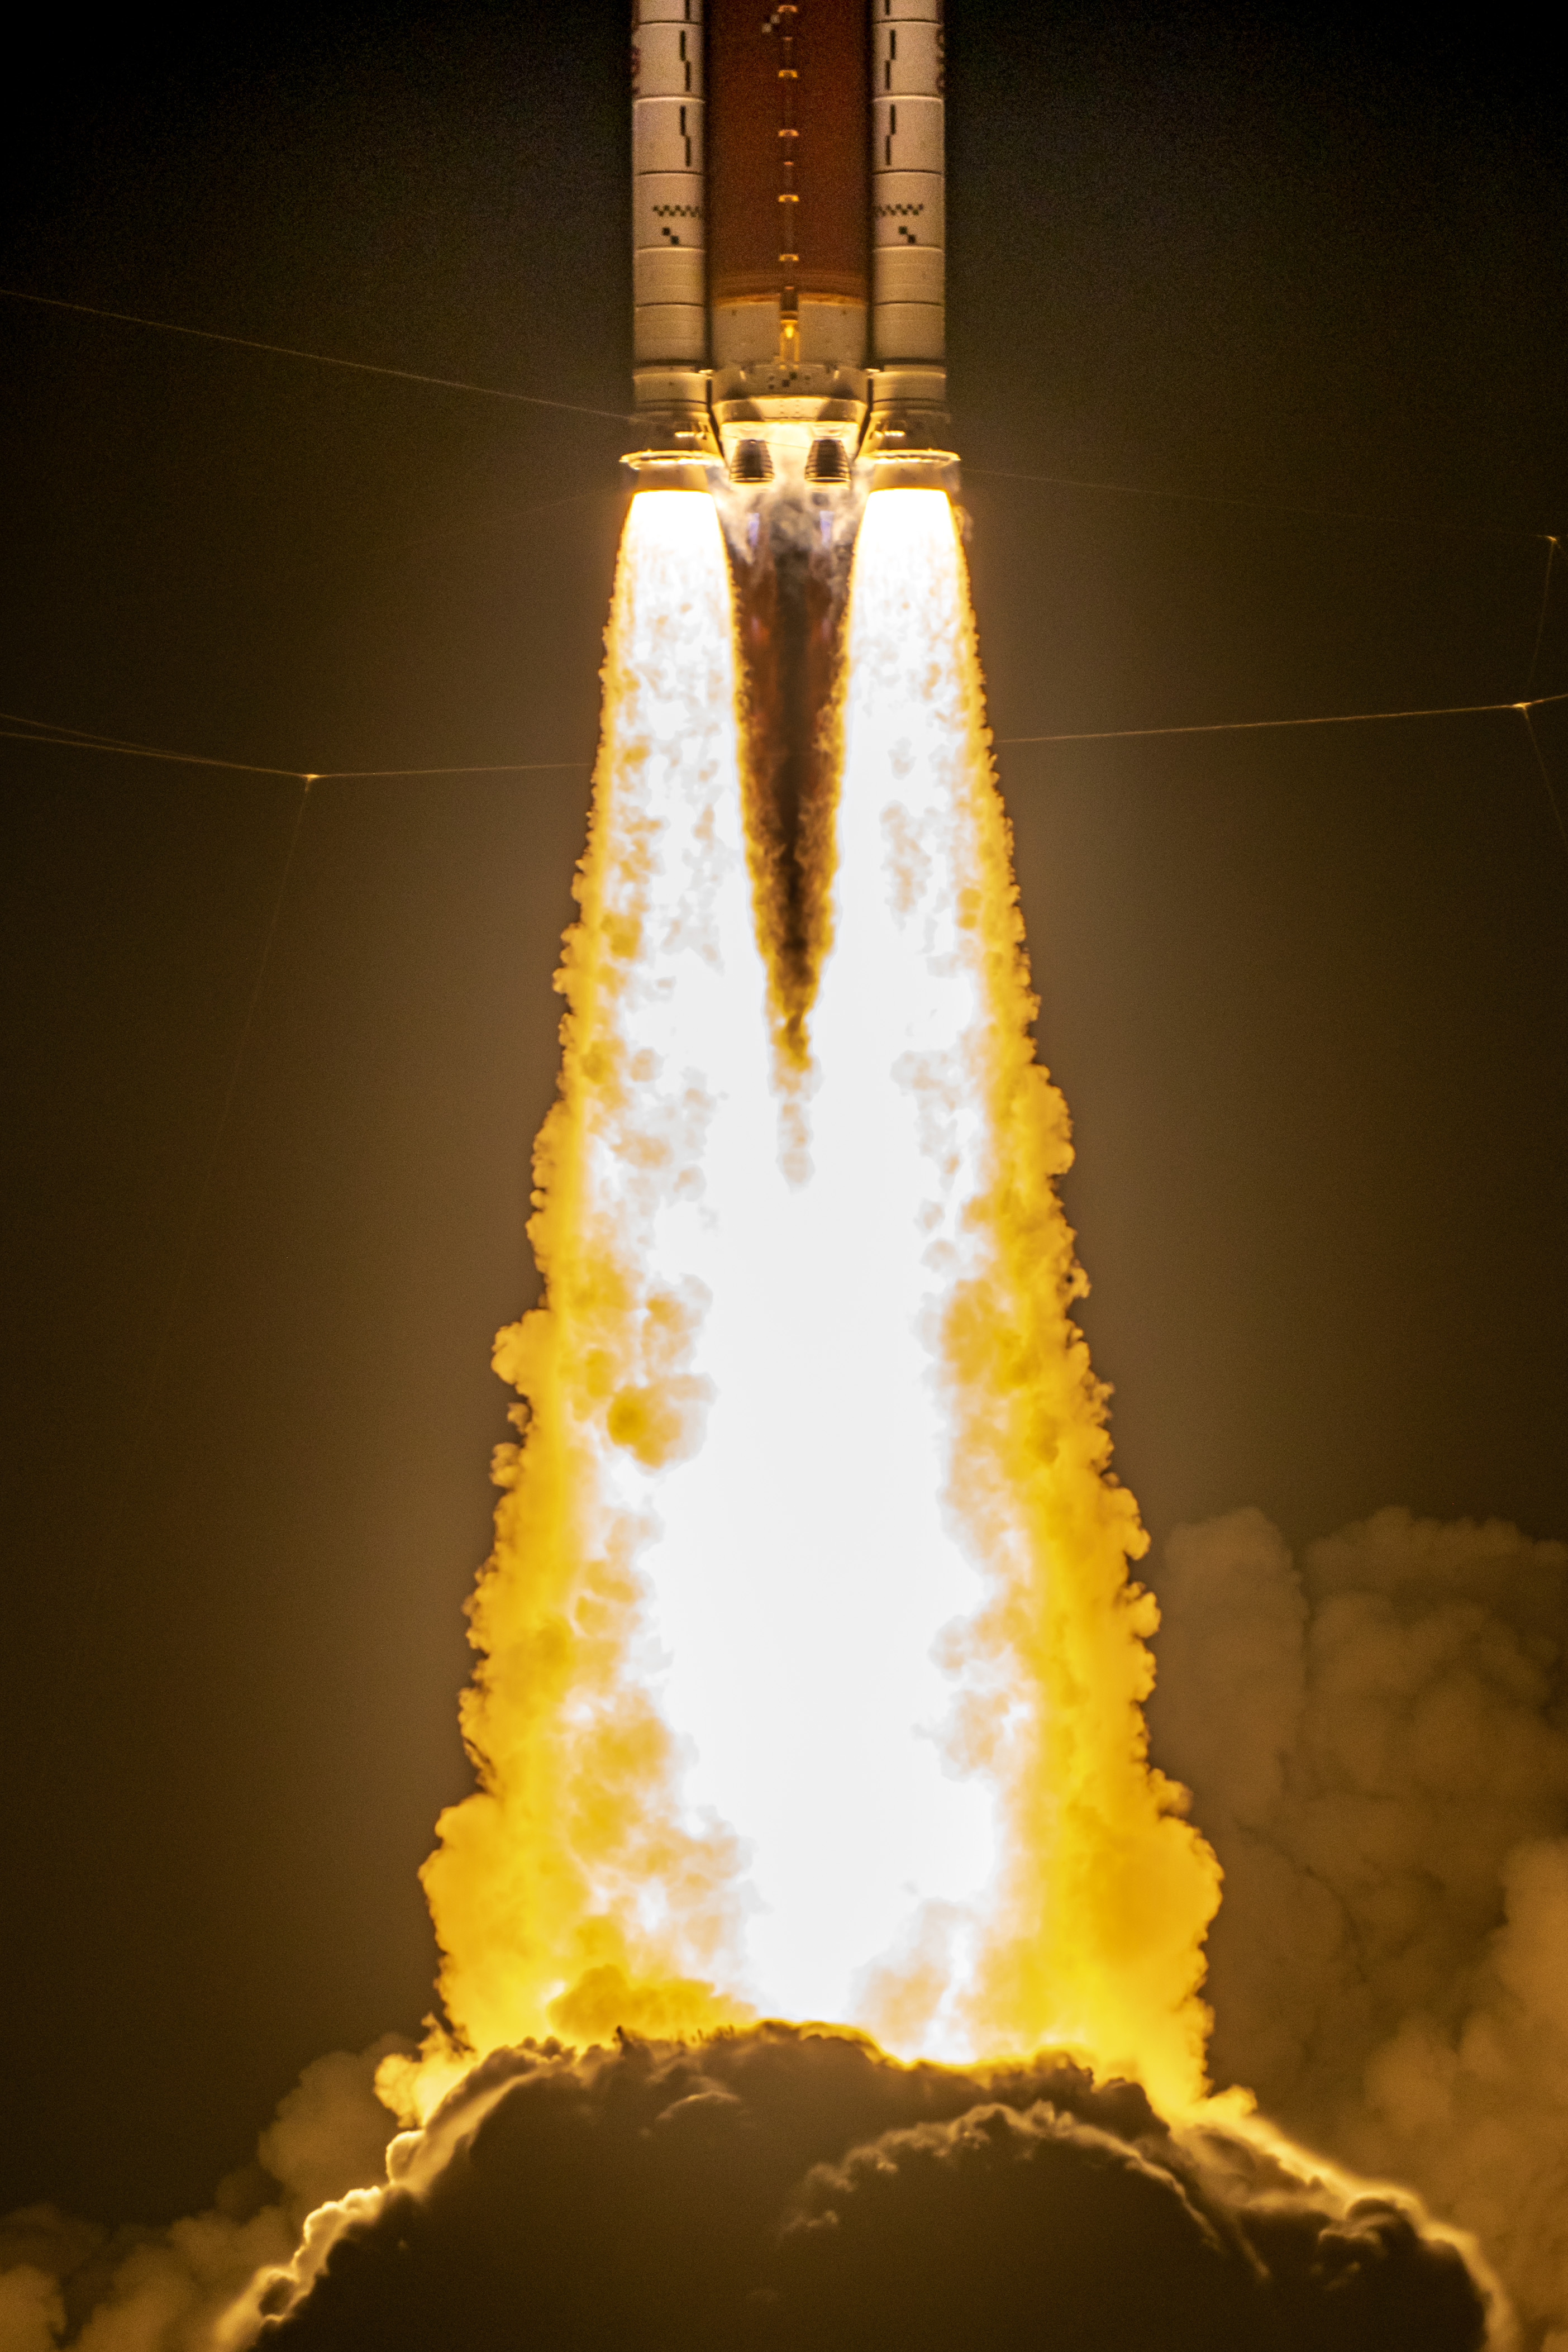 The Artemis 1 Space Launch System rocket shortly after liftoff on Nov. 16, 2022.